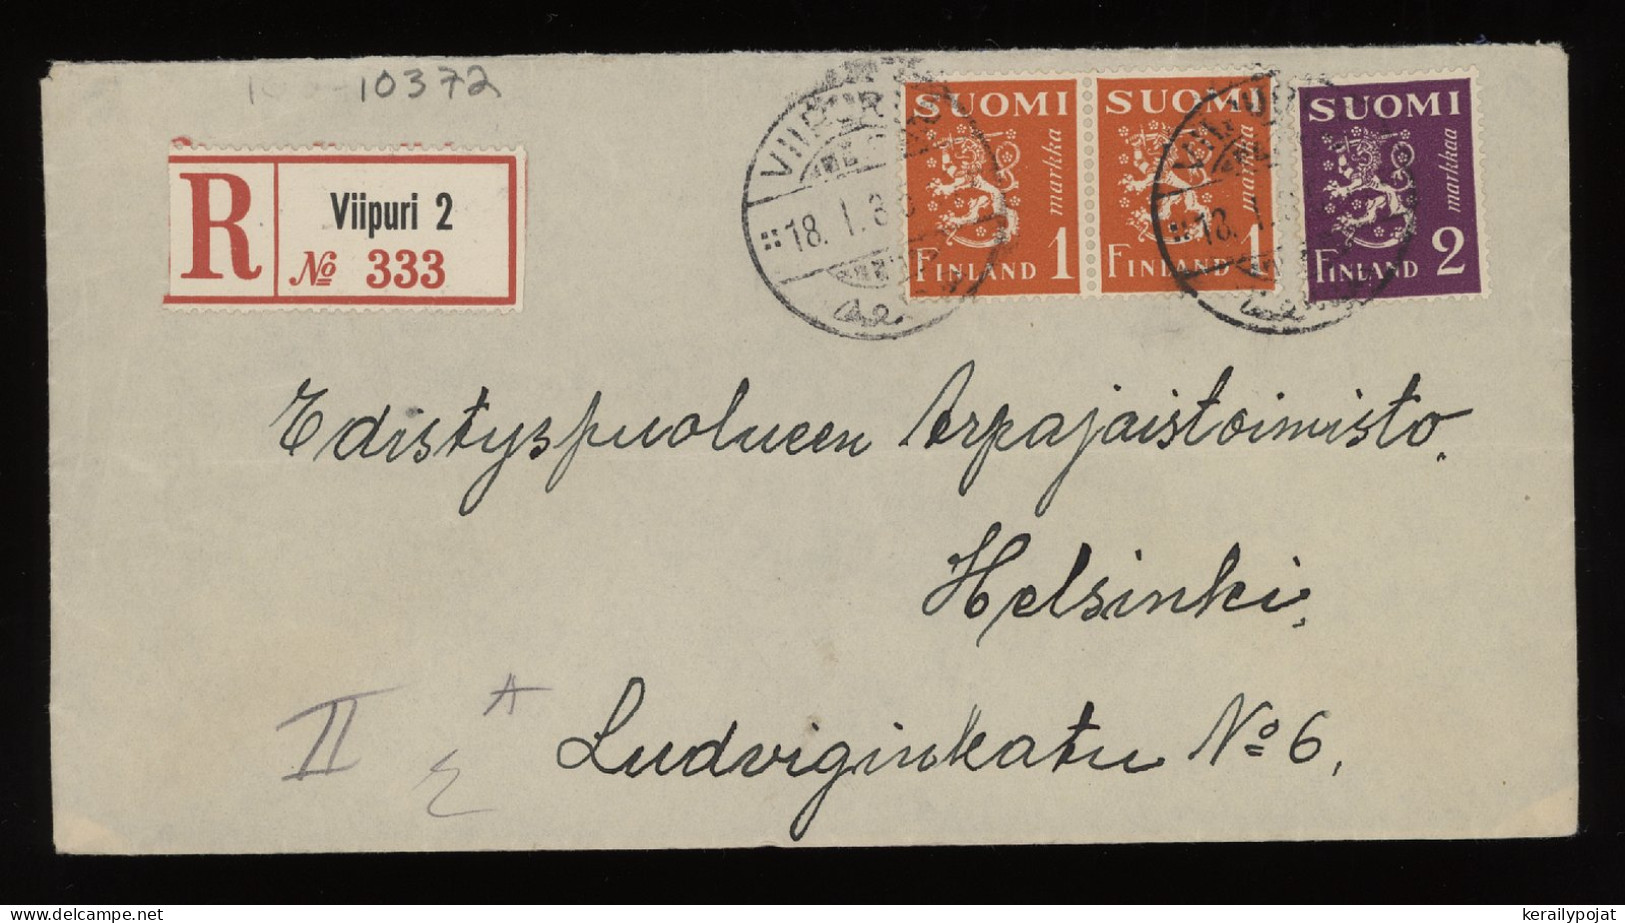 Finland 1935 Viipuri 2 Registered Cover__(10372) - Lettres & Documents